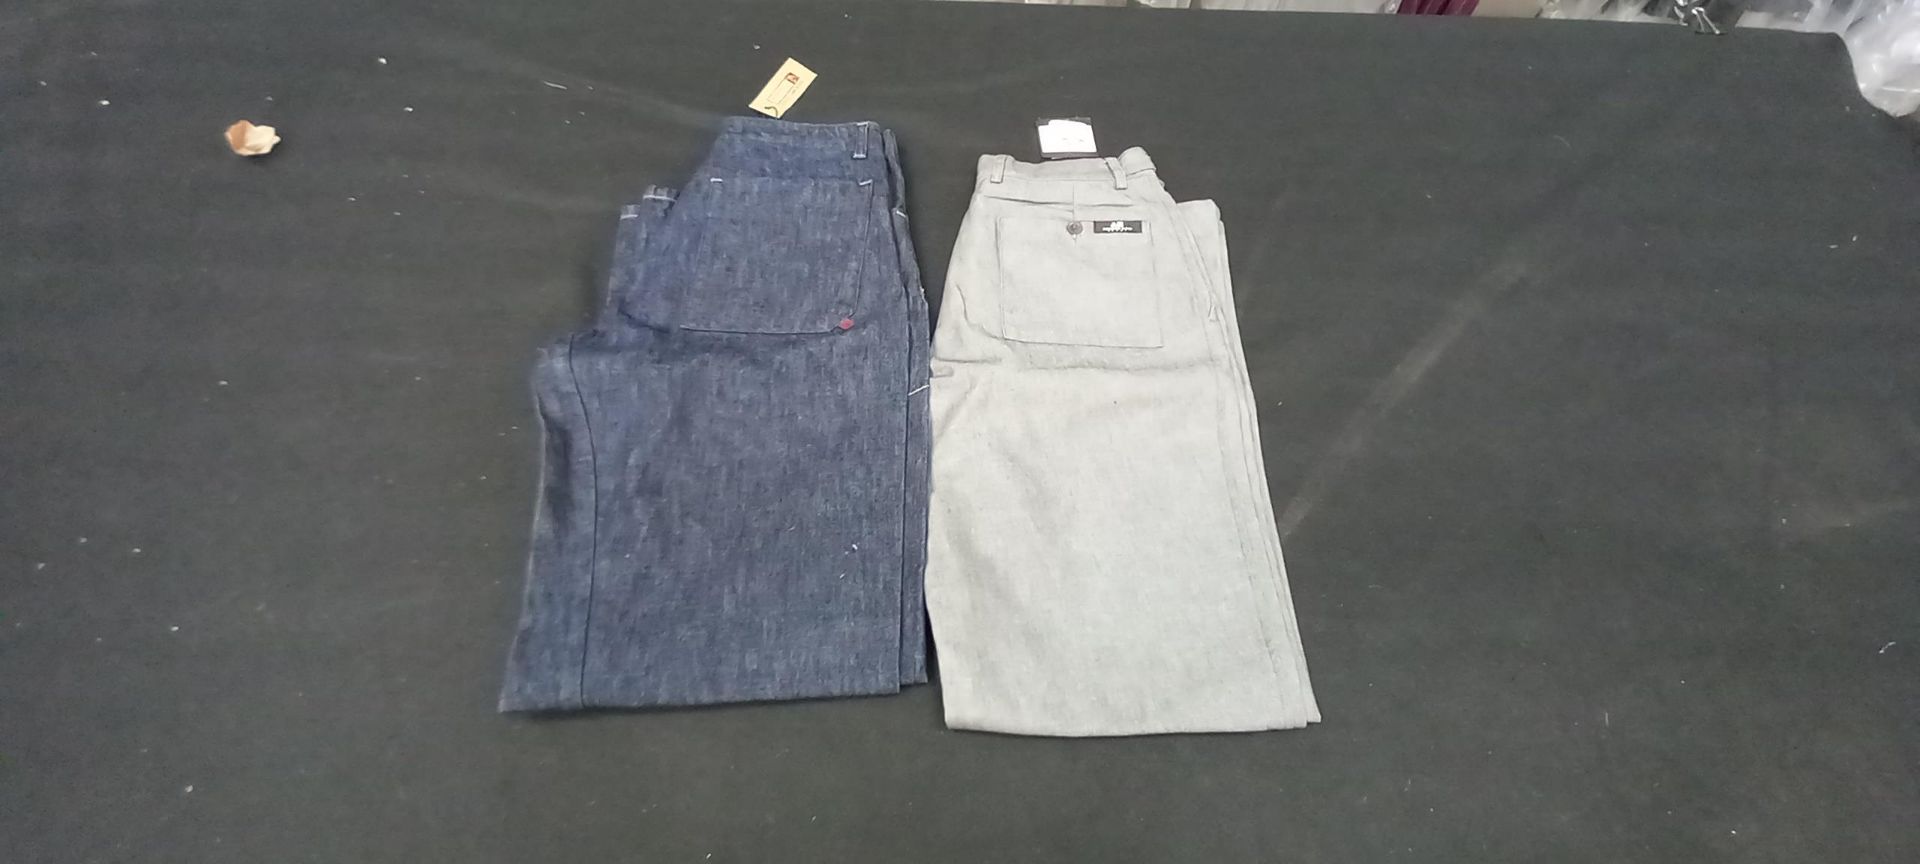 2 x Various designer jeans, 30W, Various lengths - Image 2 of 2